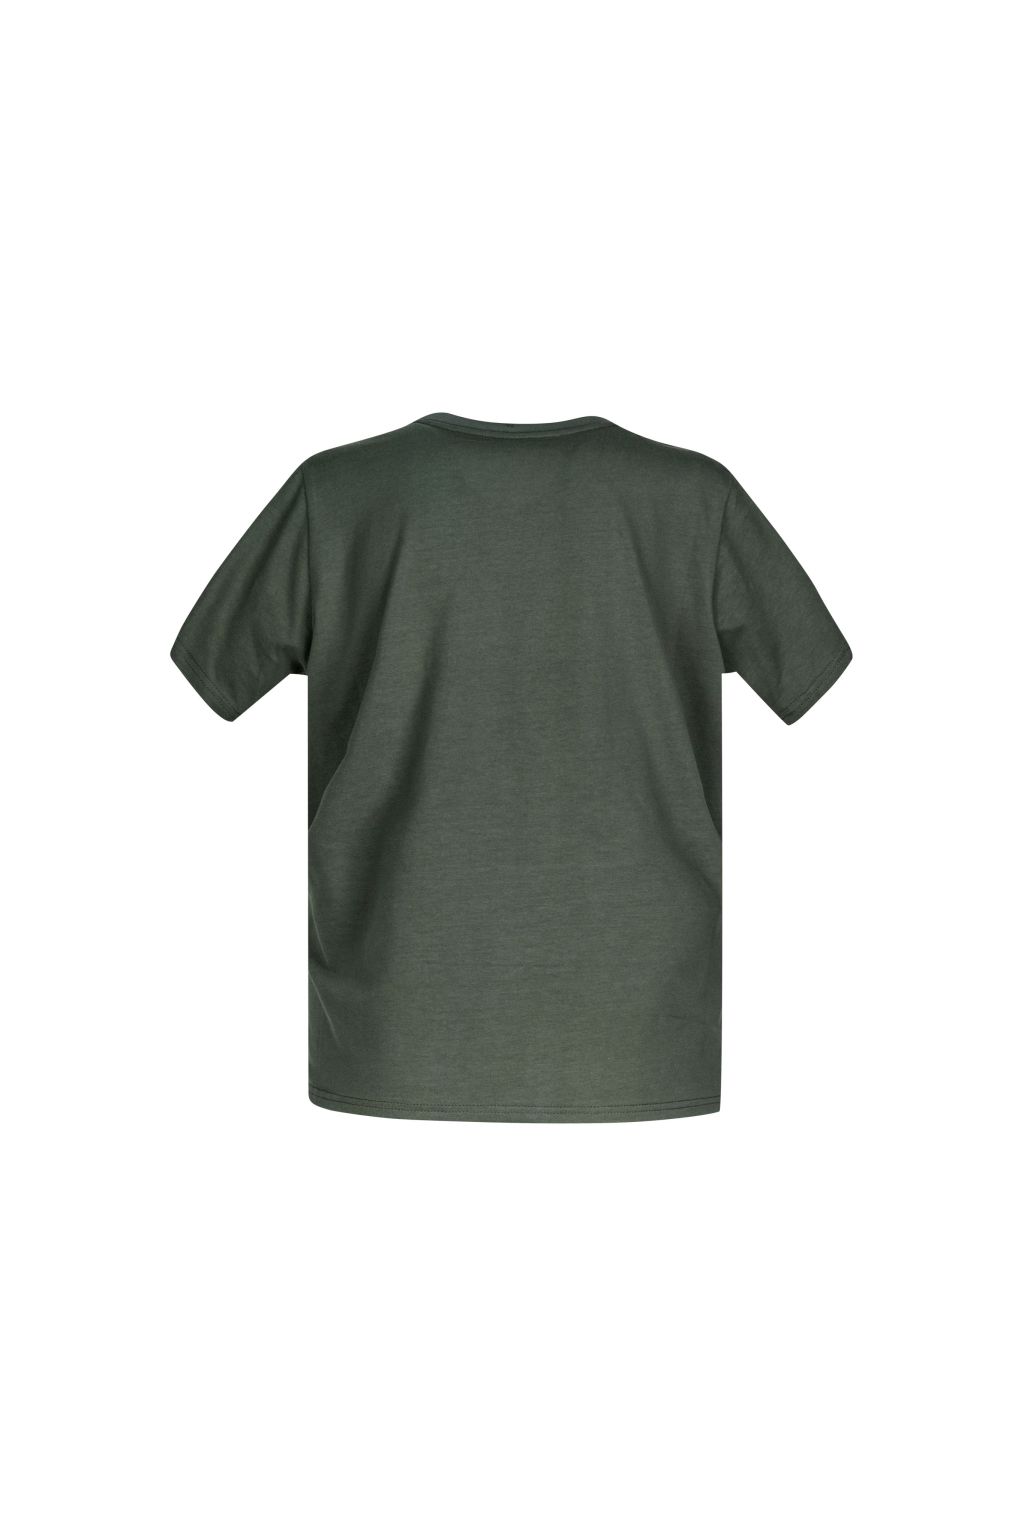 Spika GO Scope Womens T-Shirt - Teal -  - Mansfield Hunting & Fishing - Products to prepare for Corona Virus